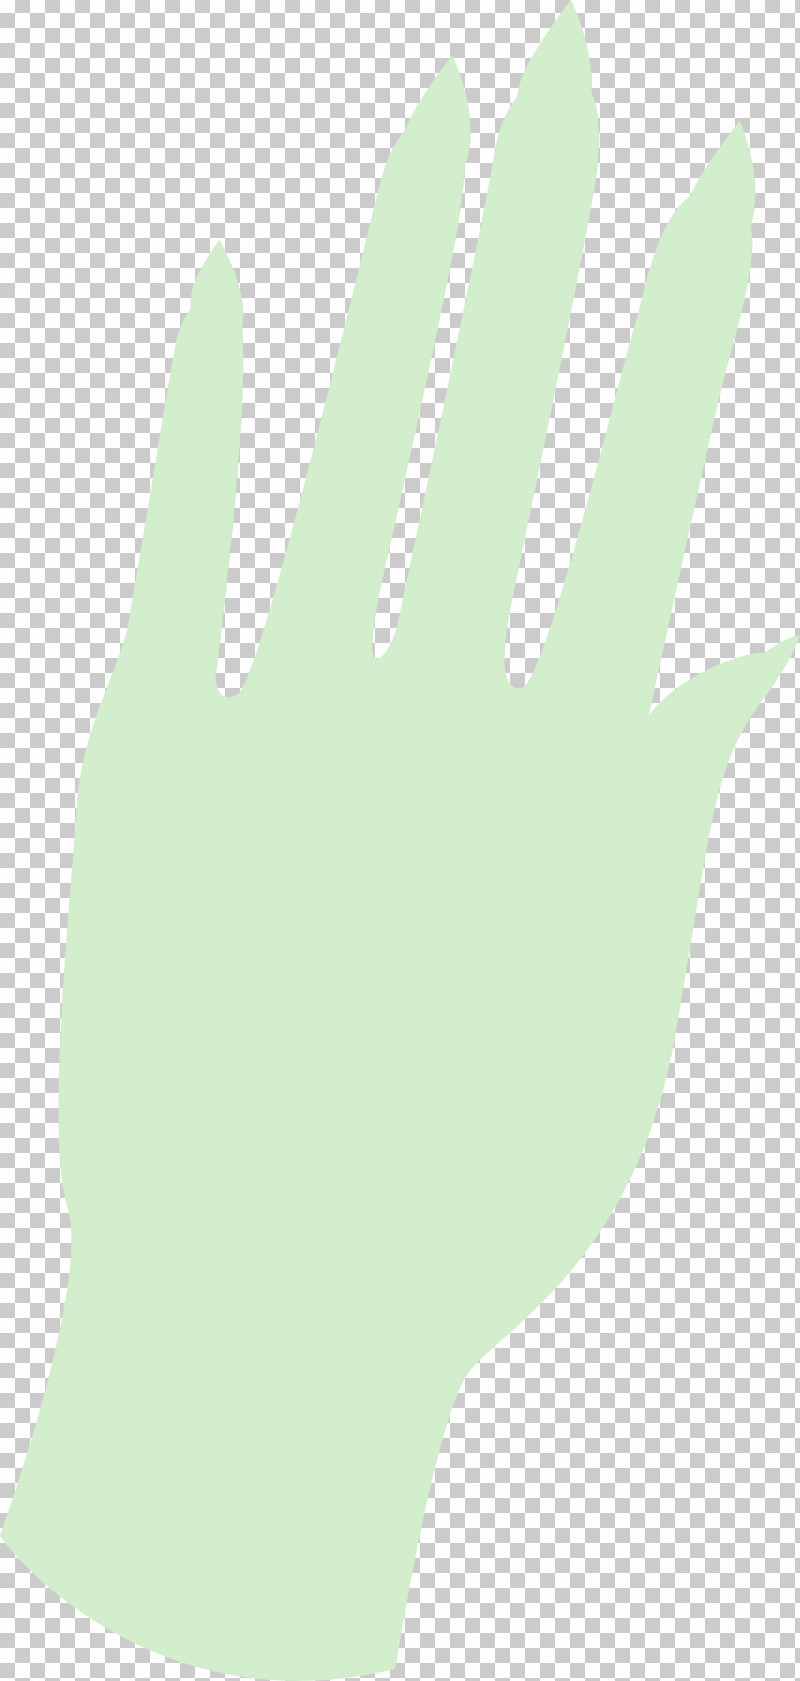 Hand Model Safety Glove Green Line Meter PNG, Clipart, Glove, Green, Hand, Hand Model, Lawn Free PNG Download